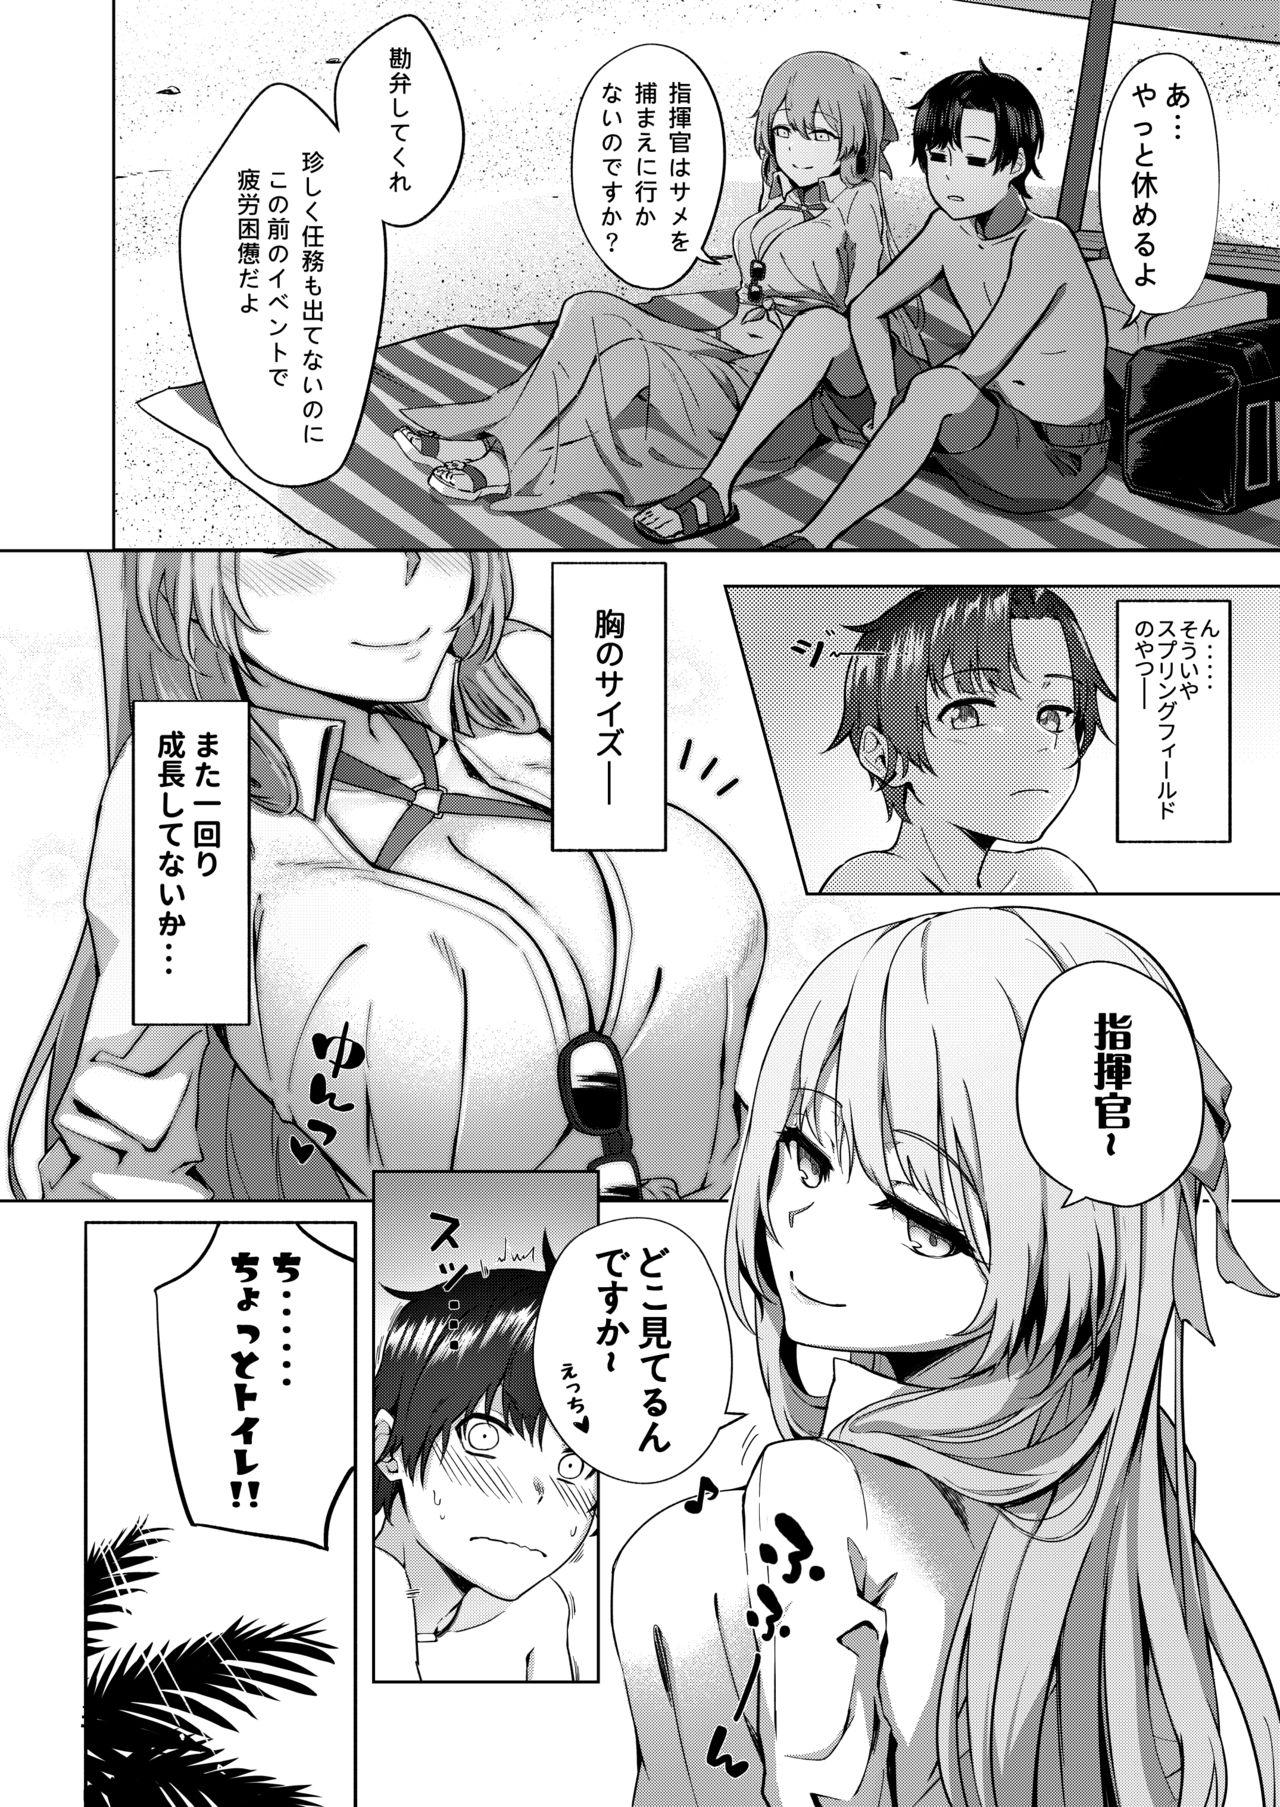 Pussy Eating Field on Fire - Girls frontline Hung - Page 4